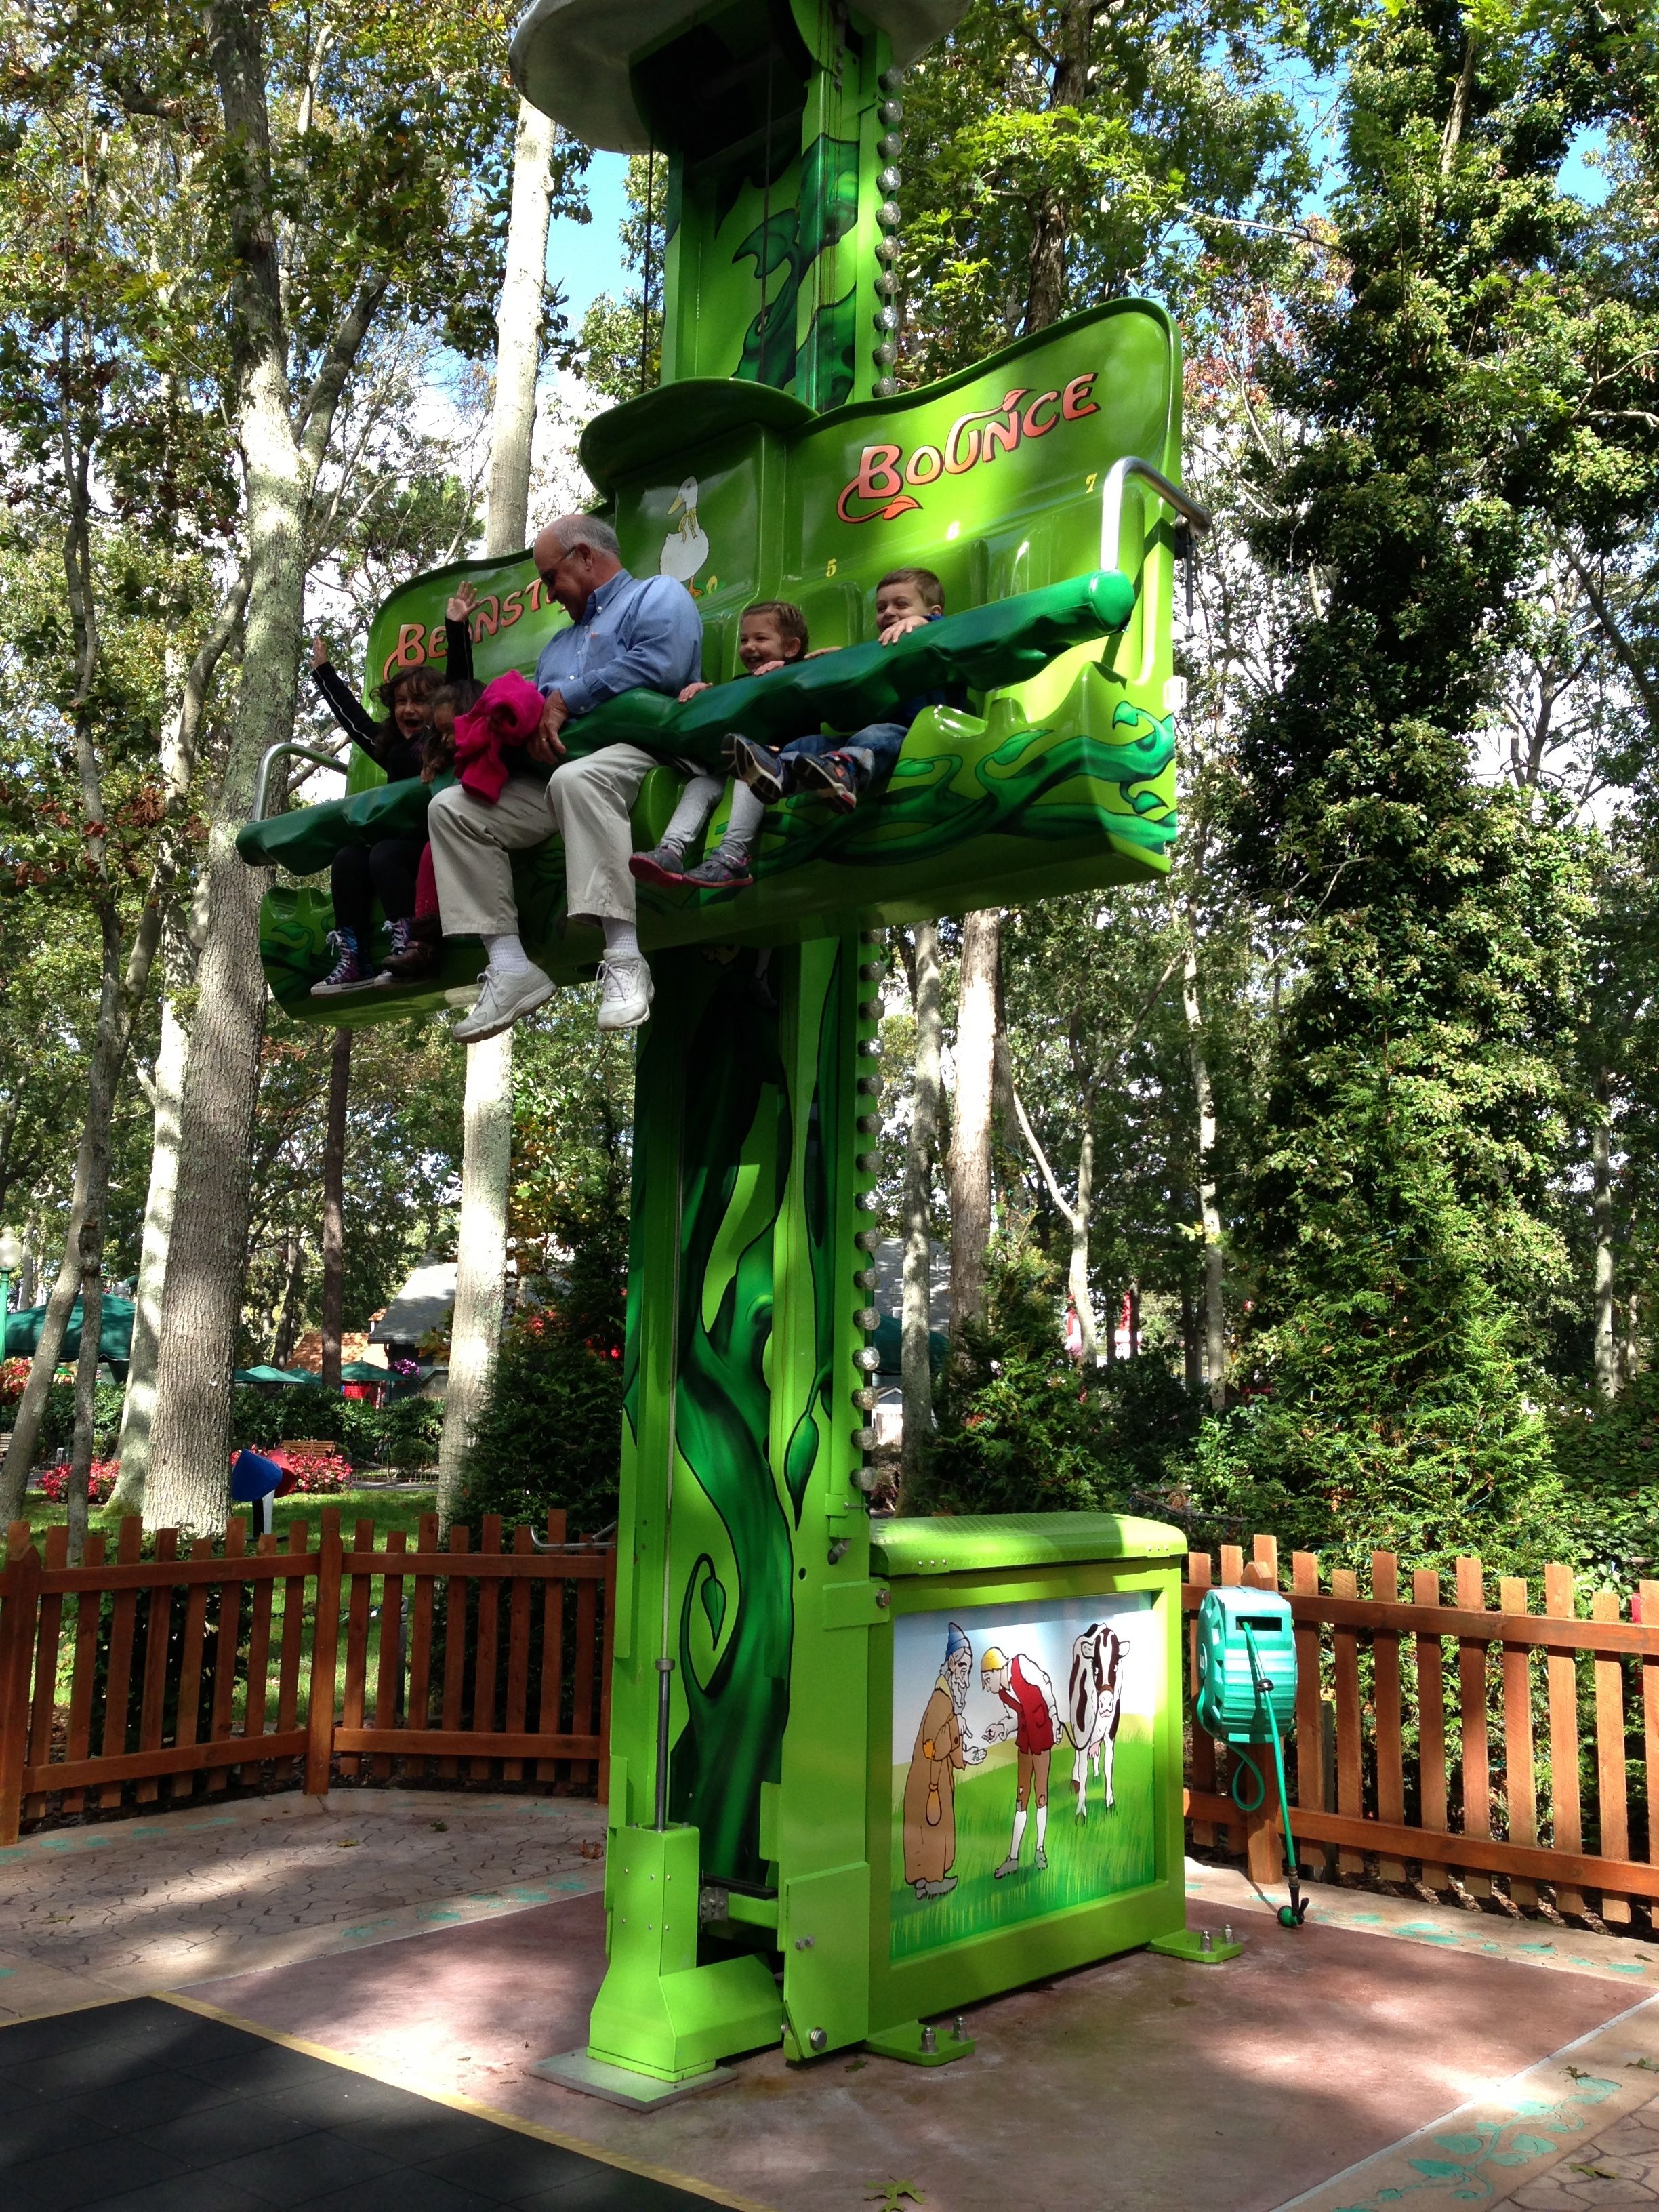 The Bean Stalk Ride was Roc's favorite by far! (In addition to the seasonal activities, all rides are fully-functioning, too!)